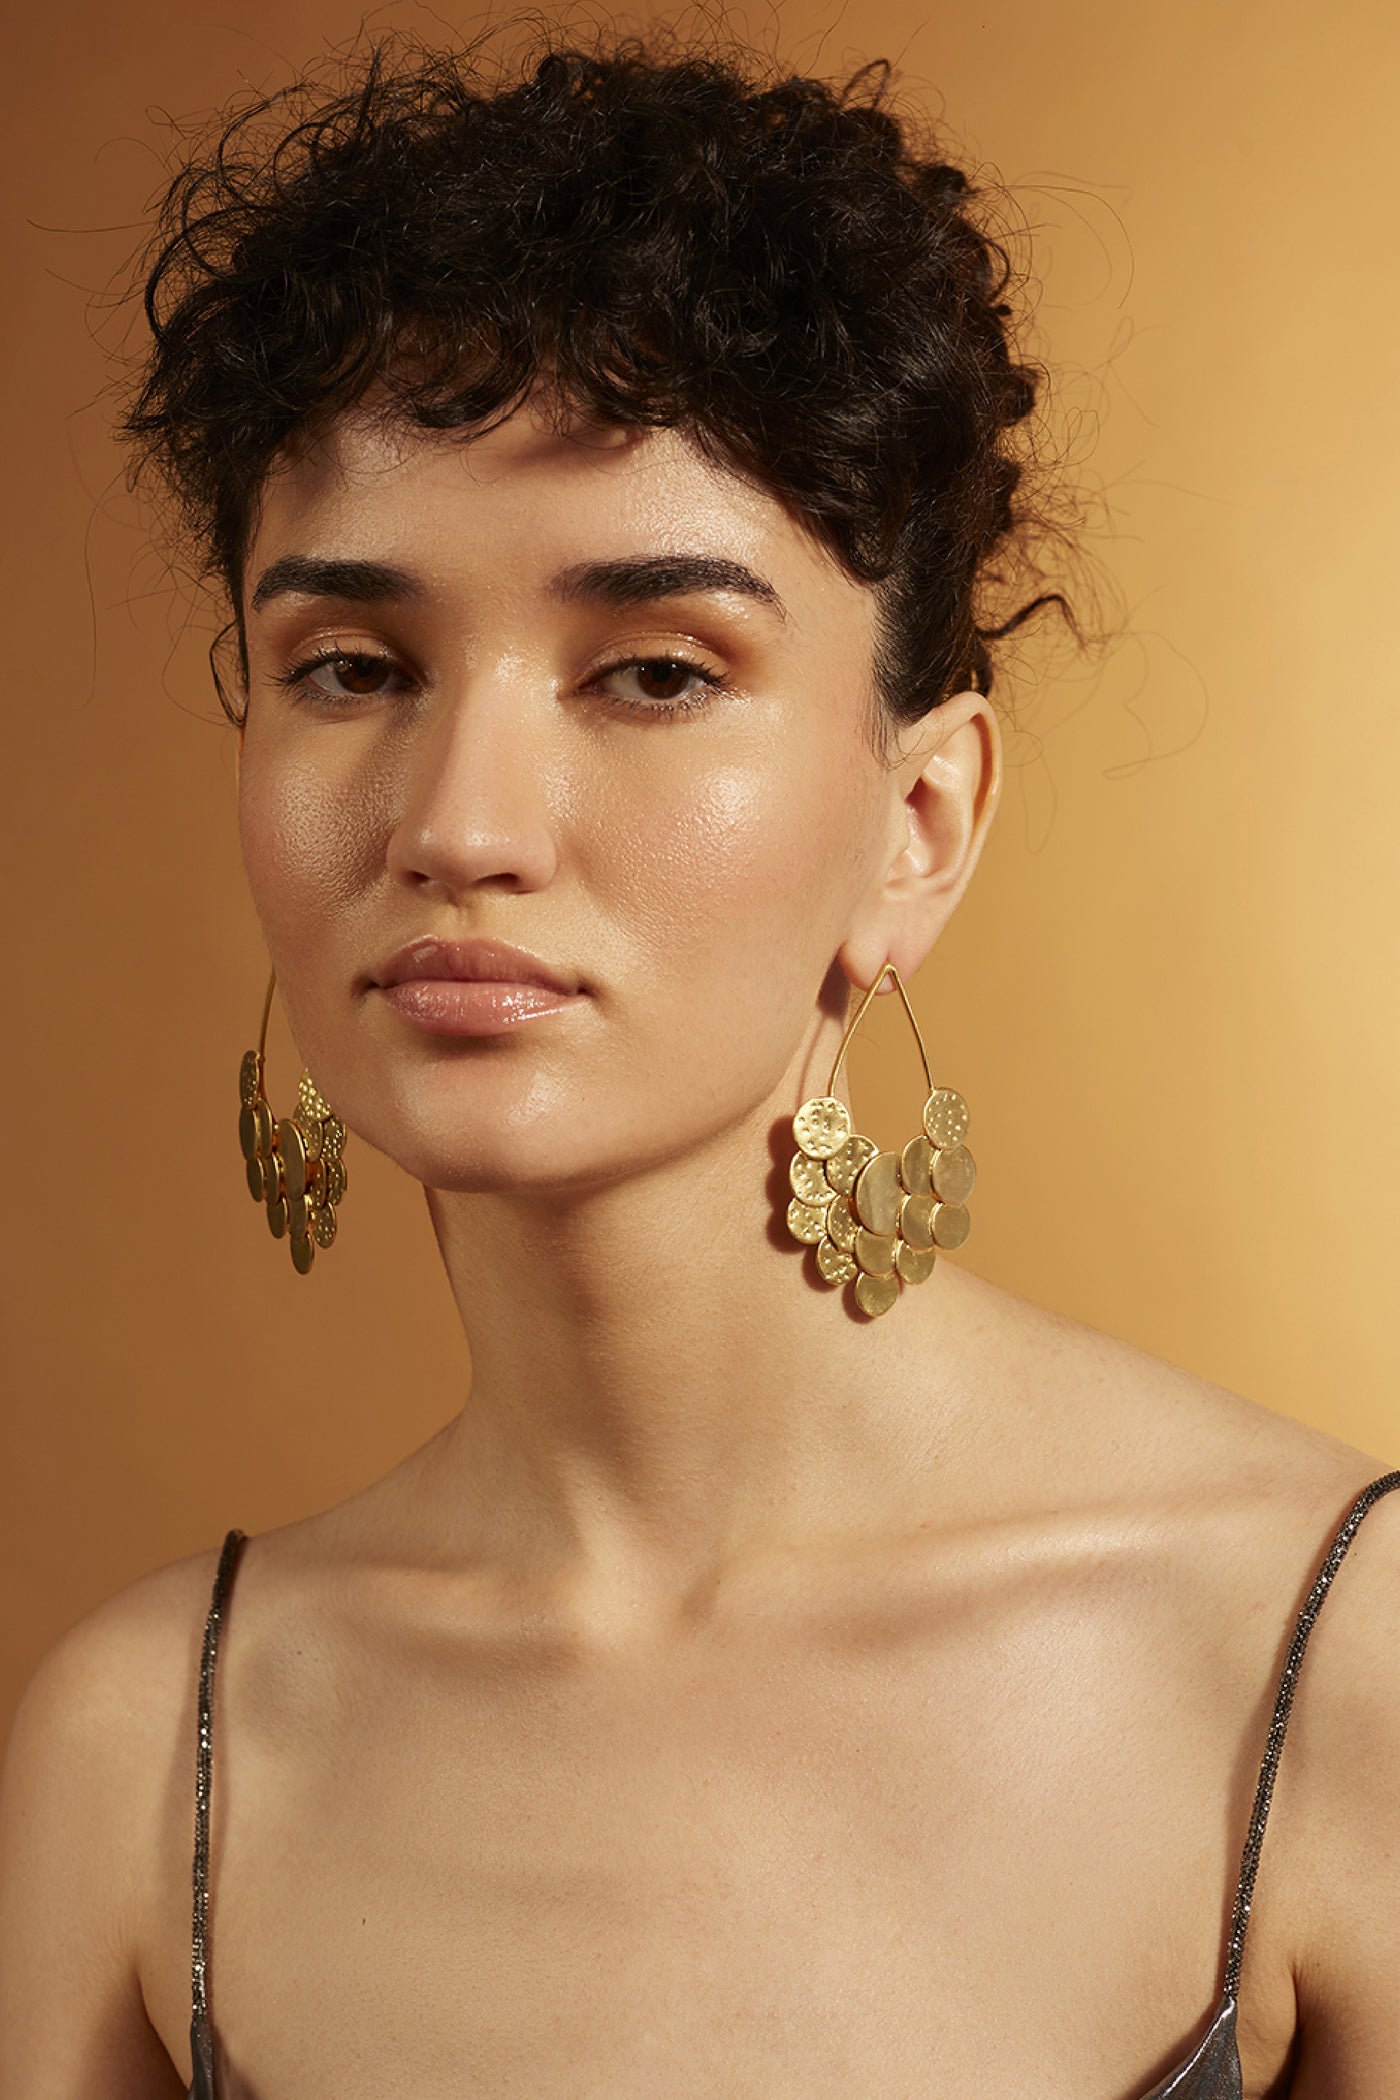 Joules by Radhika Cherry drops  Gold Earrings Jewellery indian designer wear online shopping melange singapore